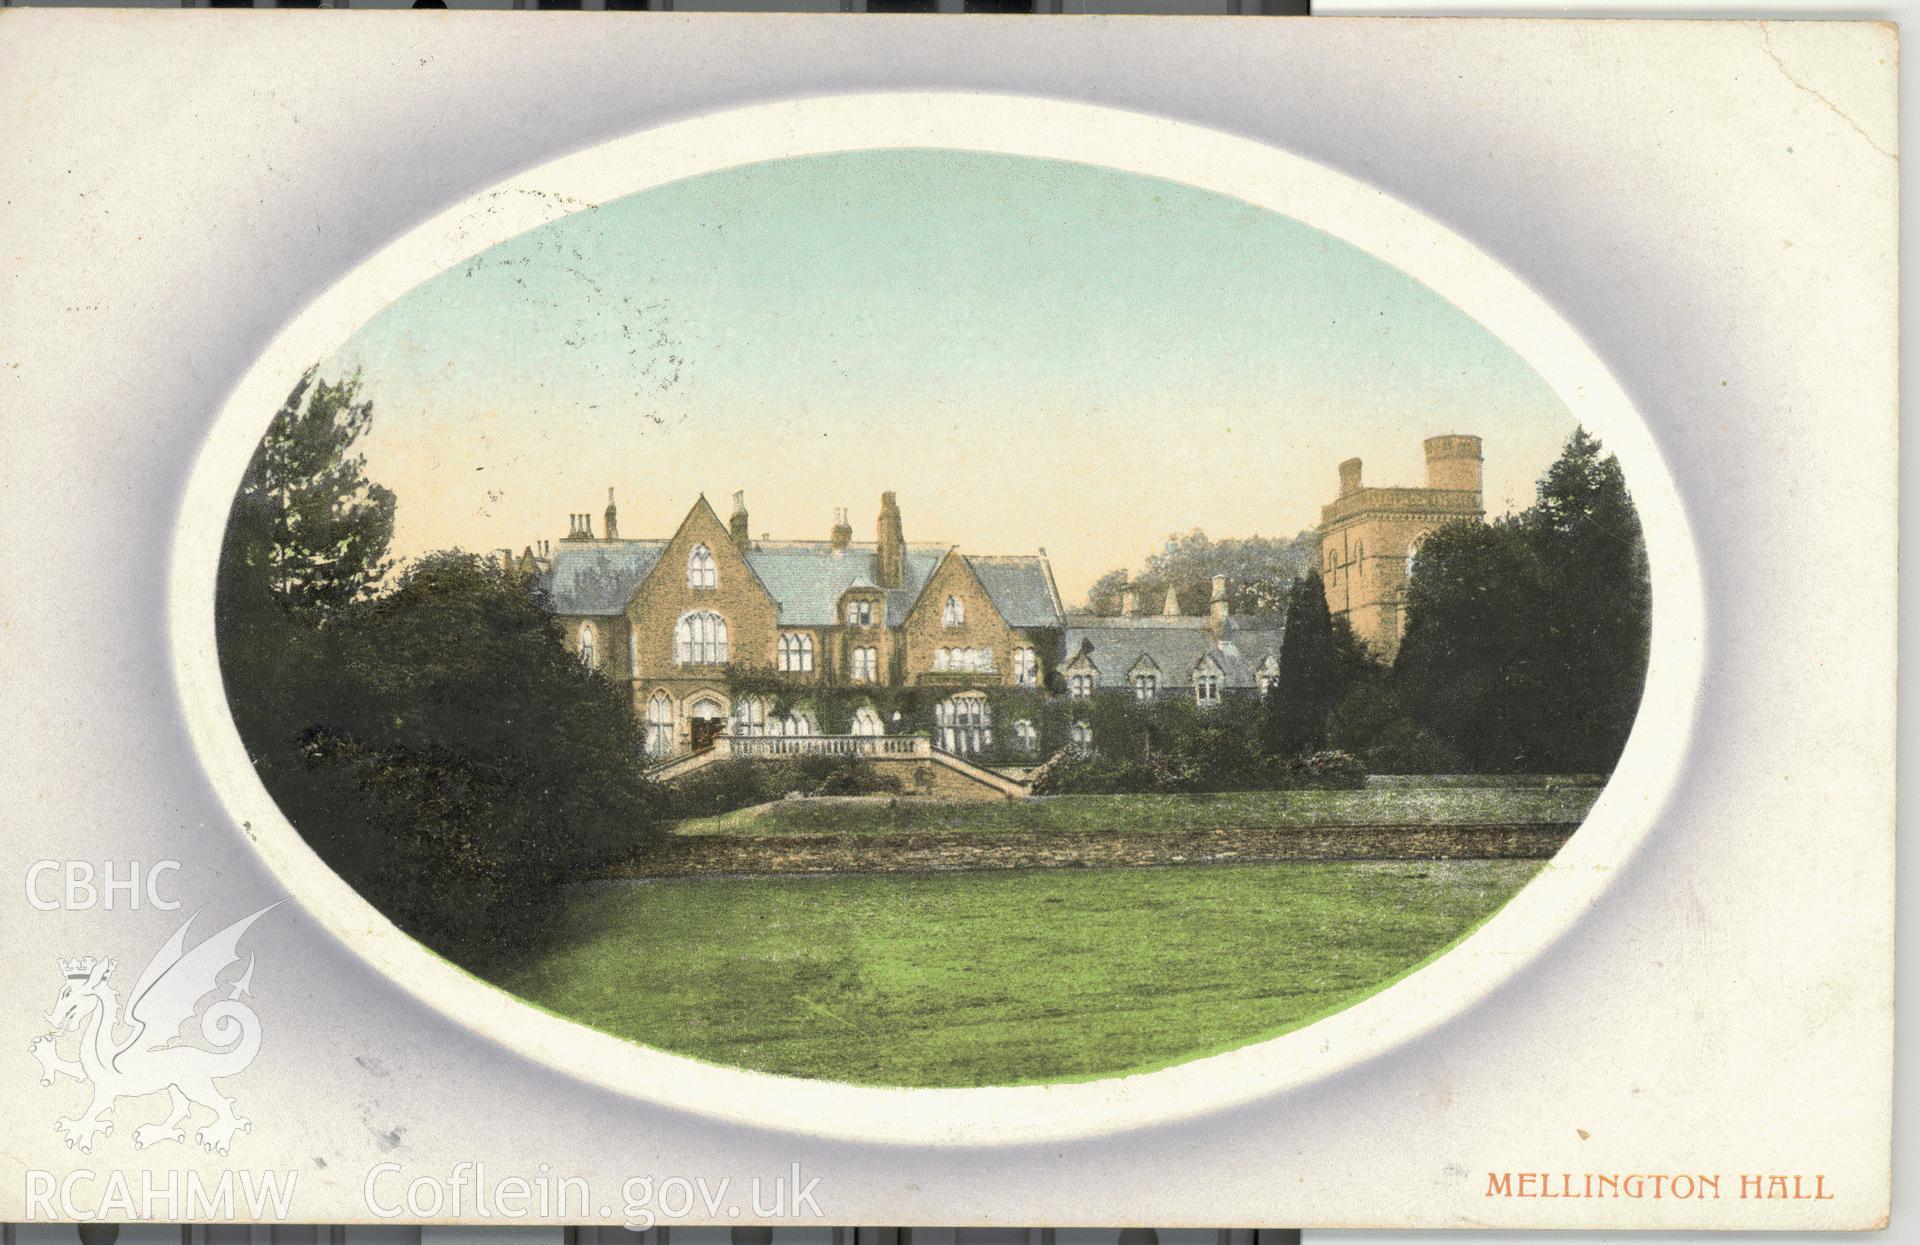 Digitised postcard image of Mellington Hall, Churchstoke. Produced by Parks and Gardens Data Services, from an original item in the Peter Davis Collection at Parks and Gardens UK. We hold only web-resolution images of this collection, suitable for viewing on screen and for research purposes only. We do not hold the original images, or publication quality scans.